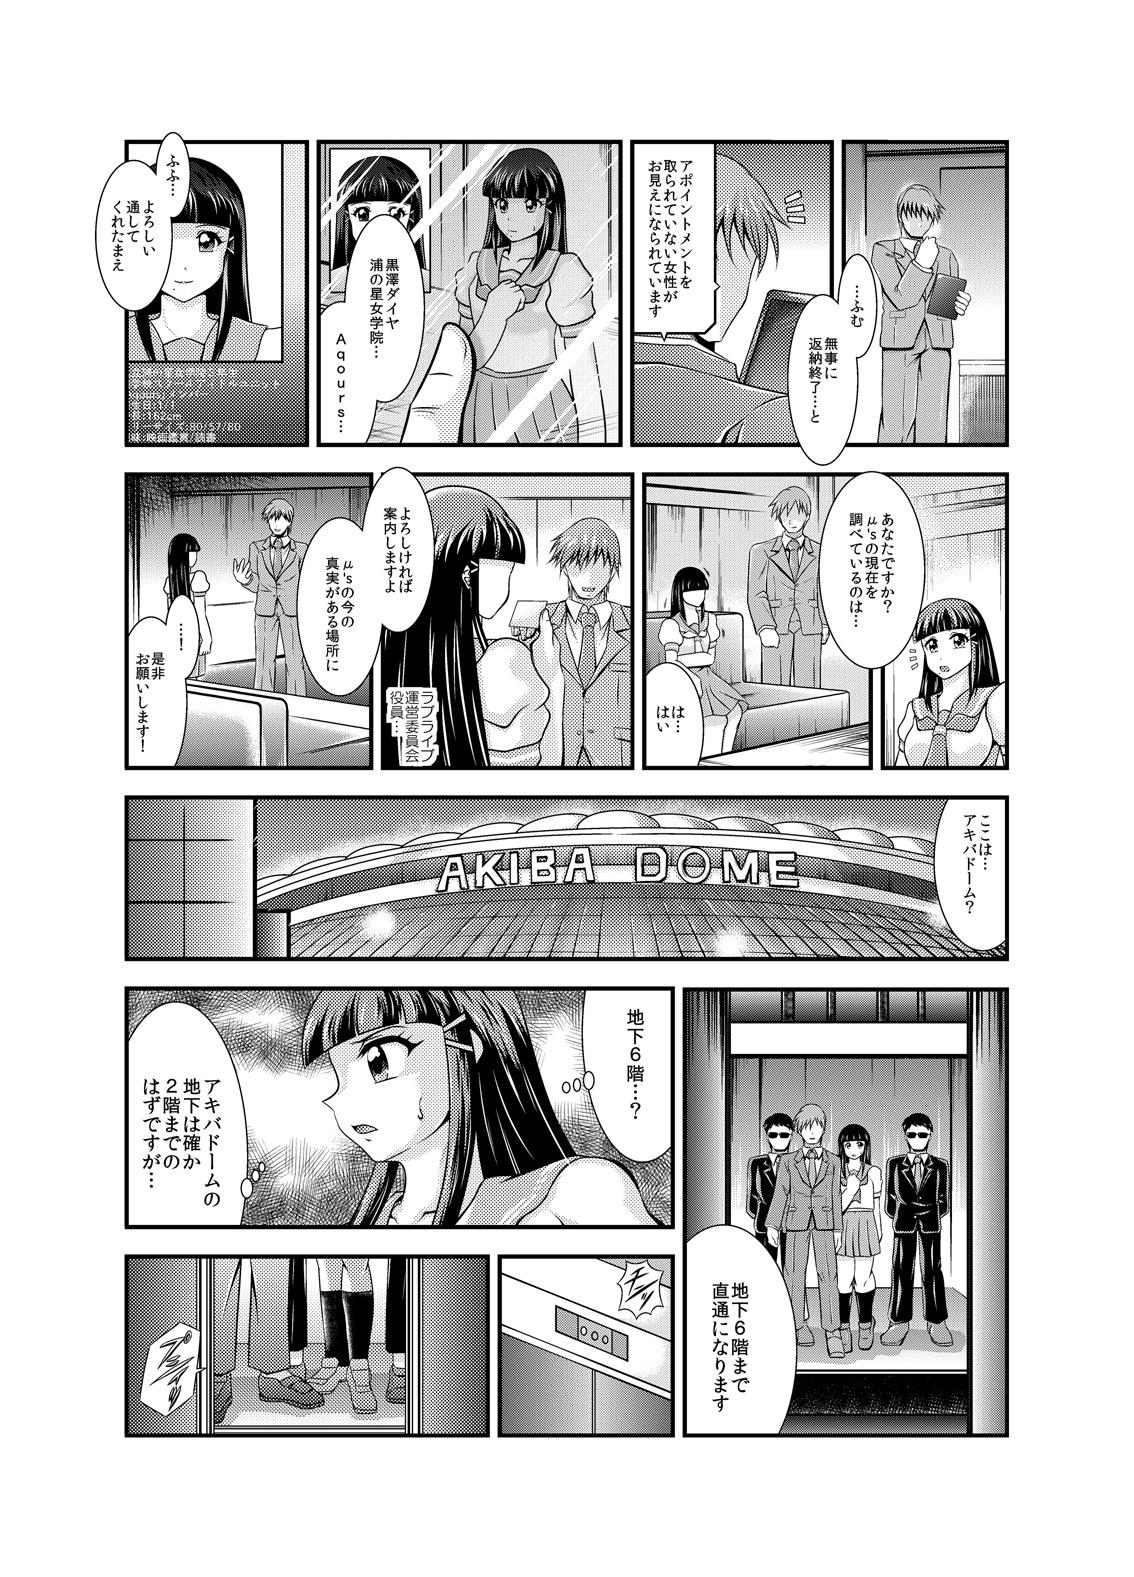 Nylon ProjectAqours EP02:"M"EMORIES - Love live Married - Page 4